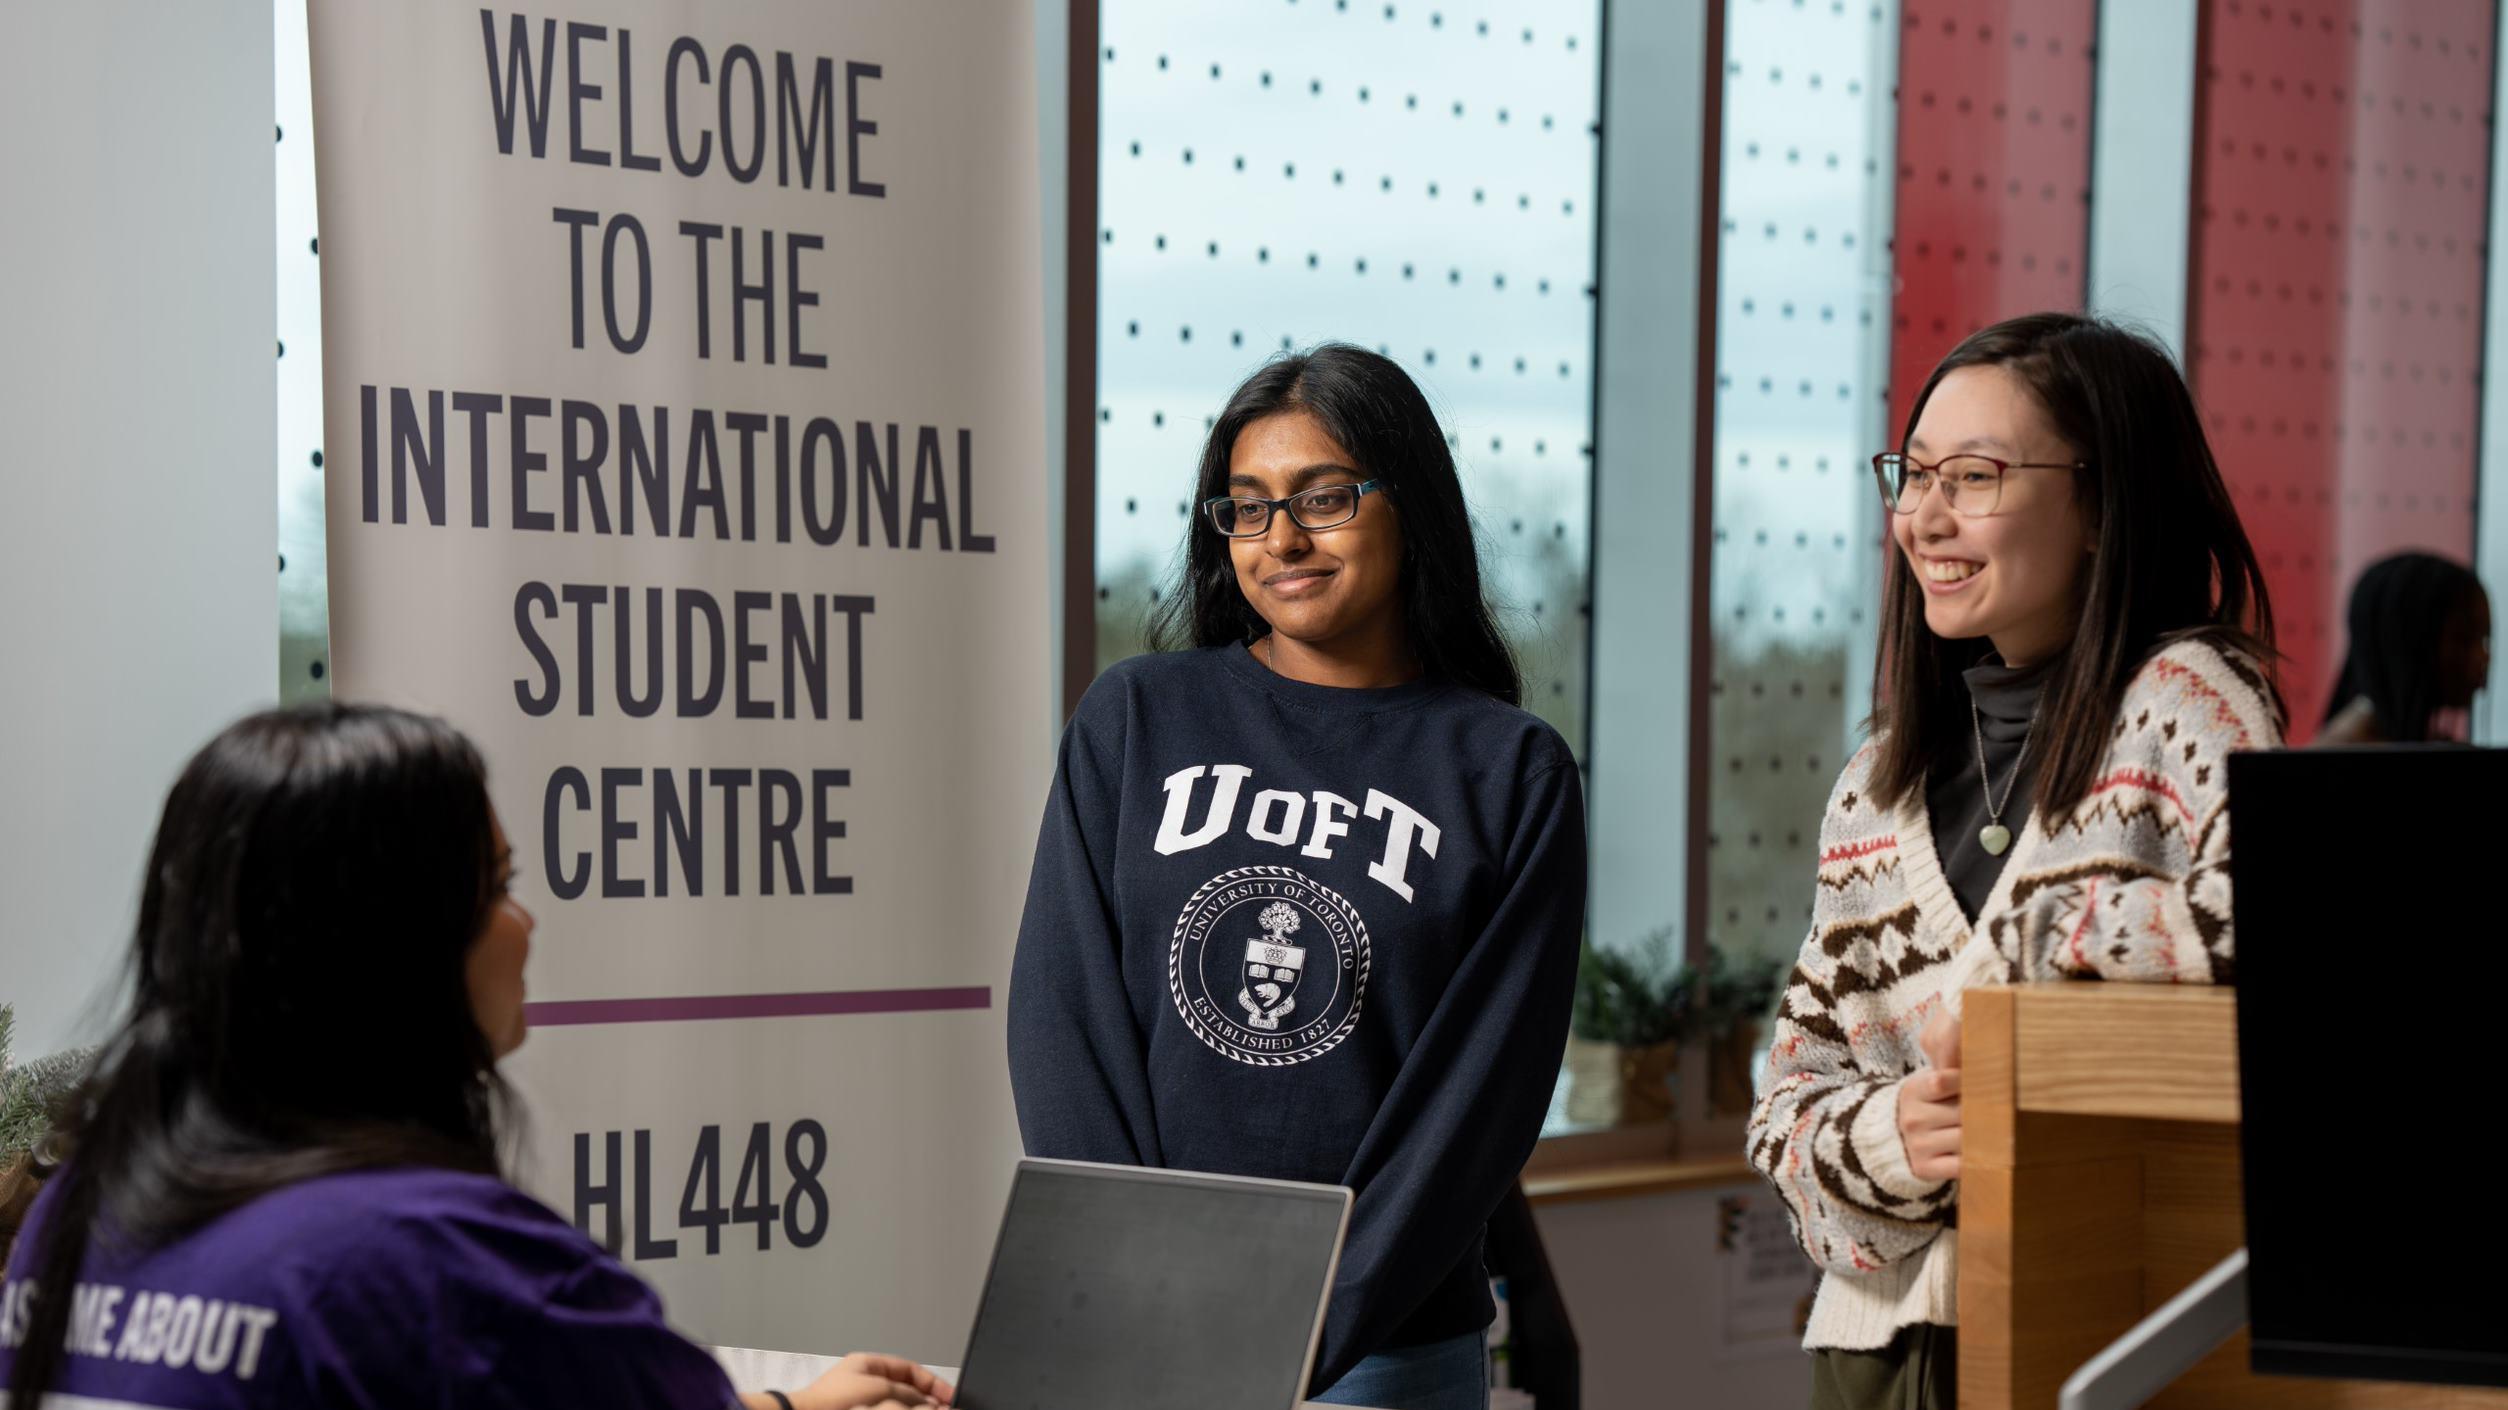 Students at the International Student Centre